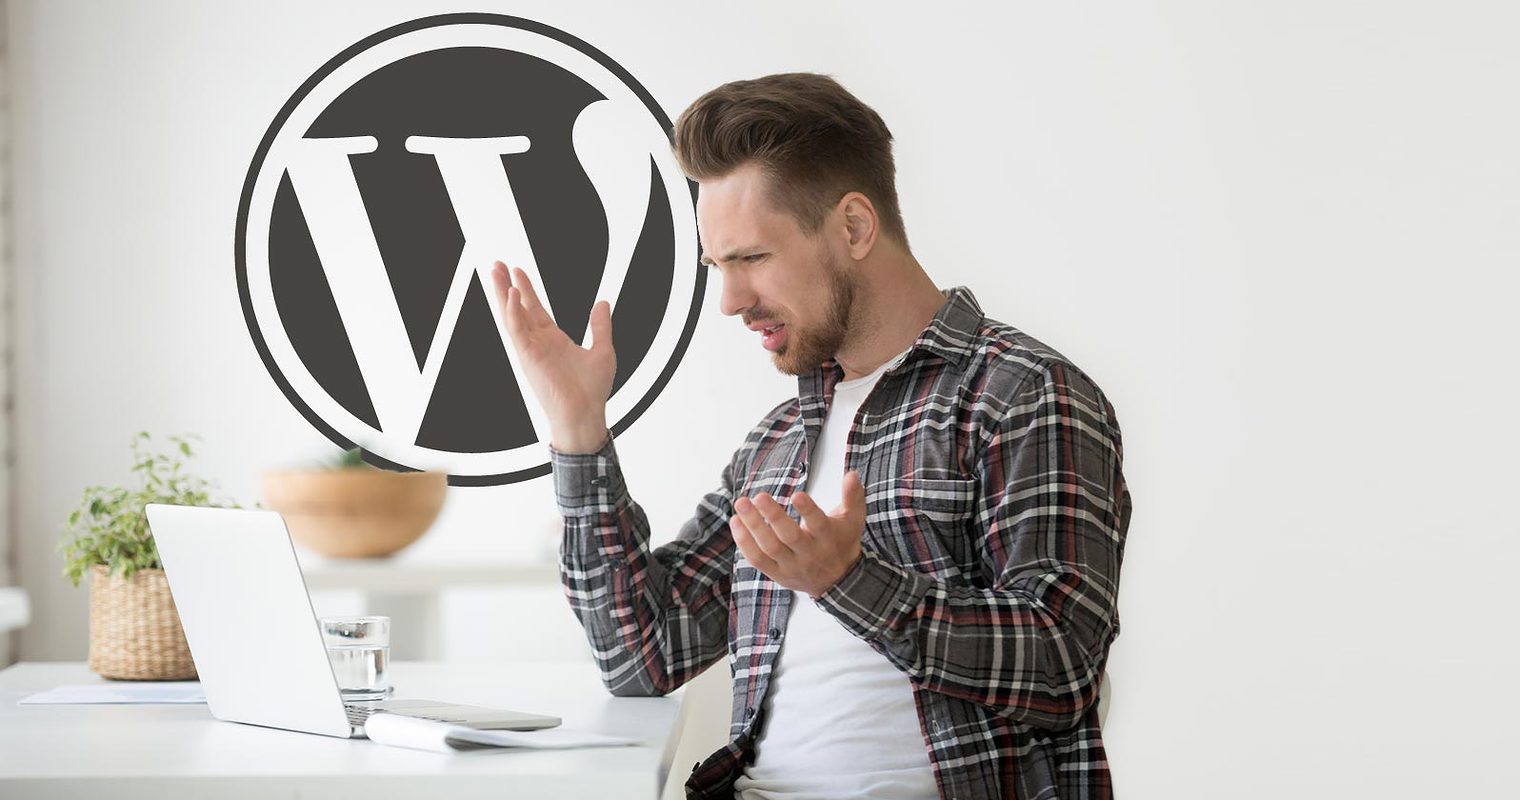 ACF WordPress Plugin Vulnerability Affects Up To +2 Million Sites